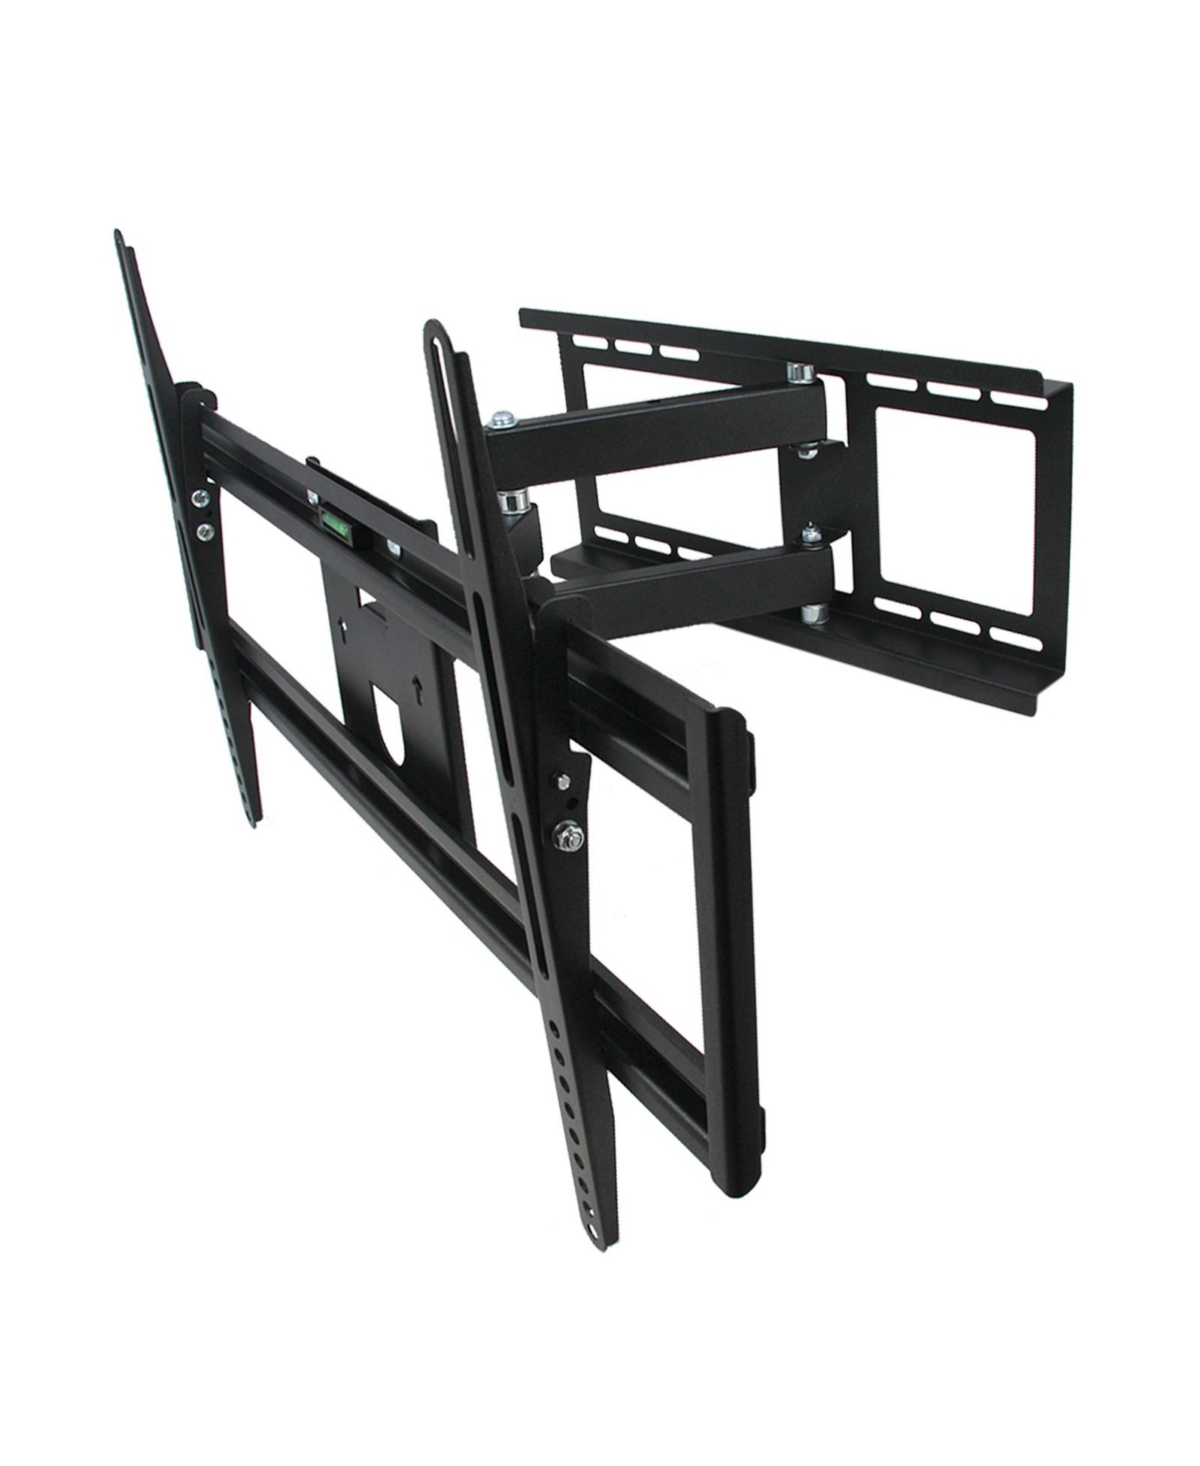 32-70" Full Motion Television Wall Mount - Black